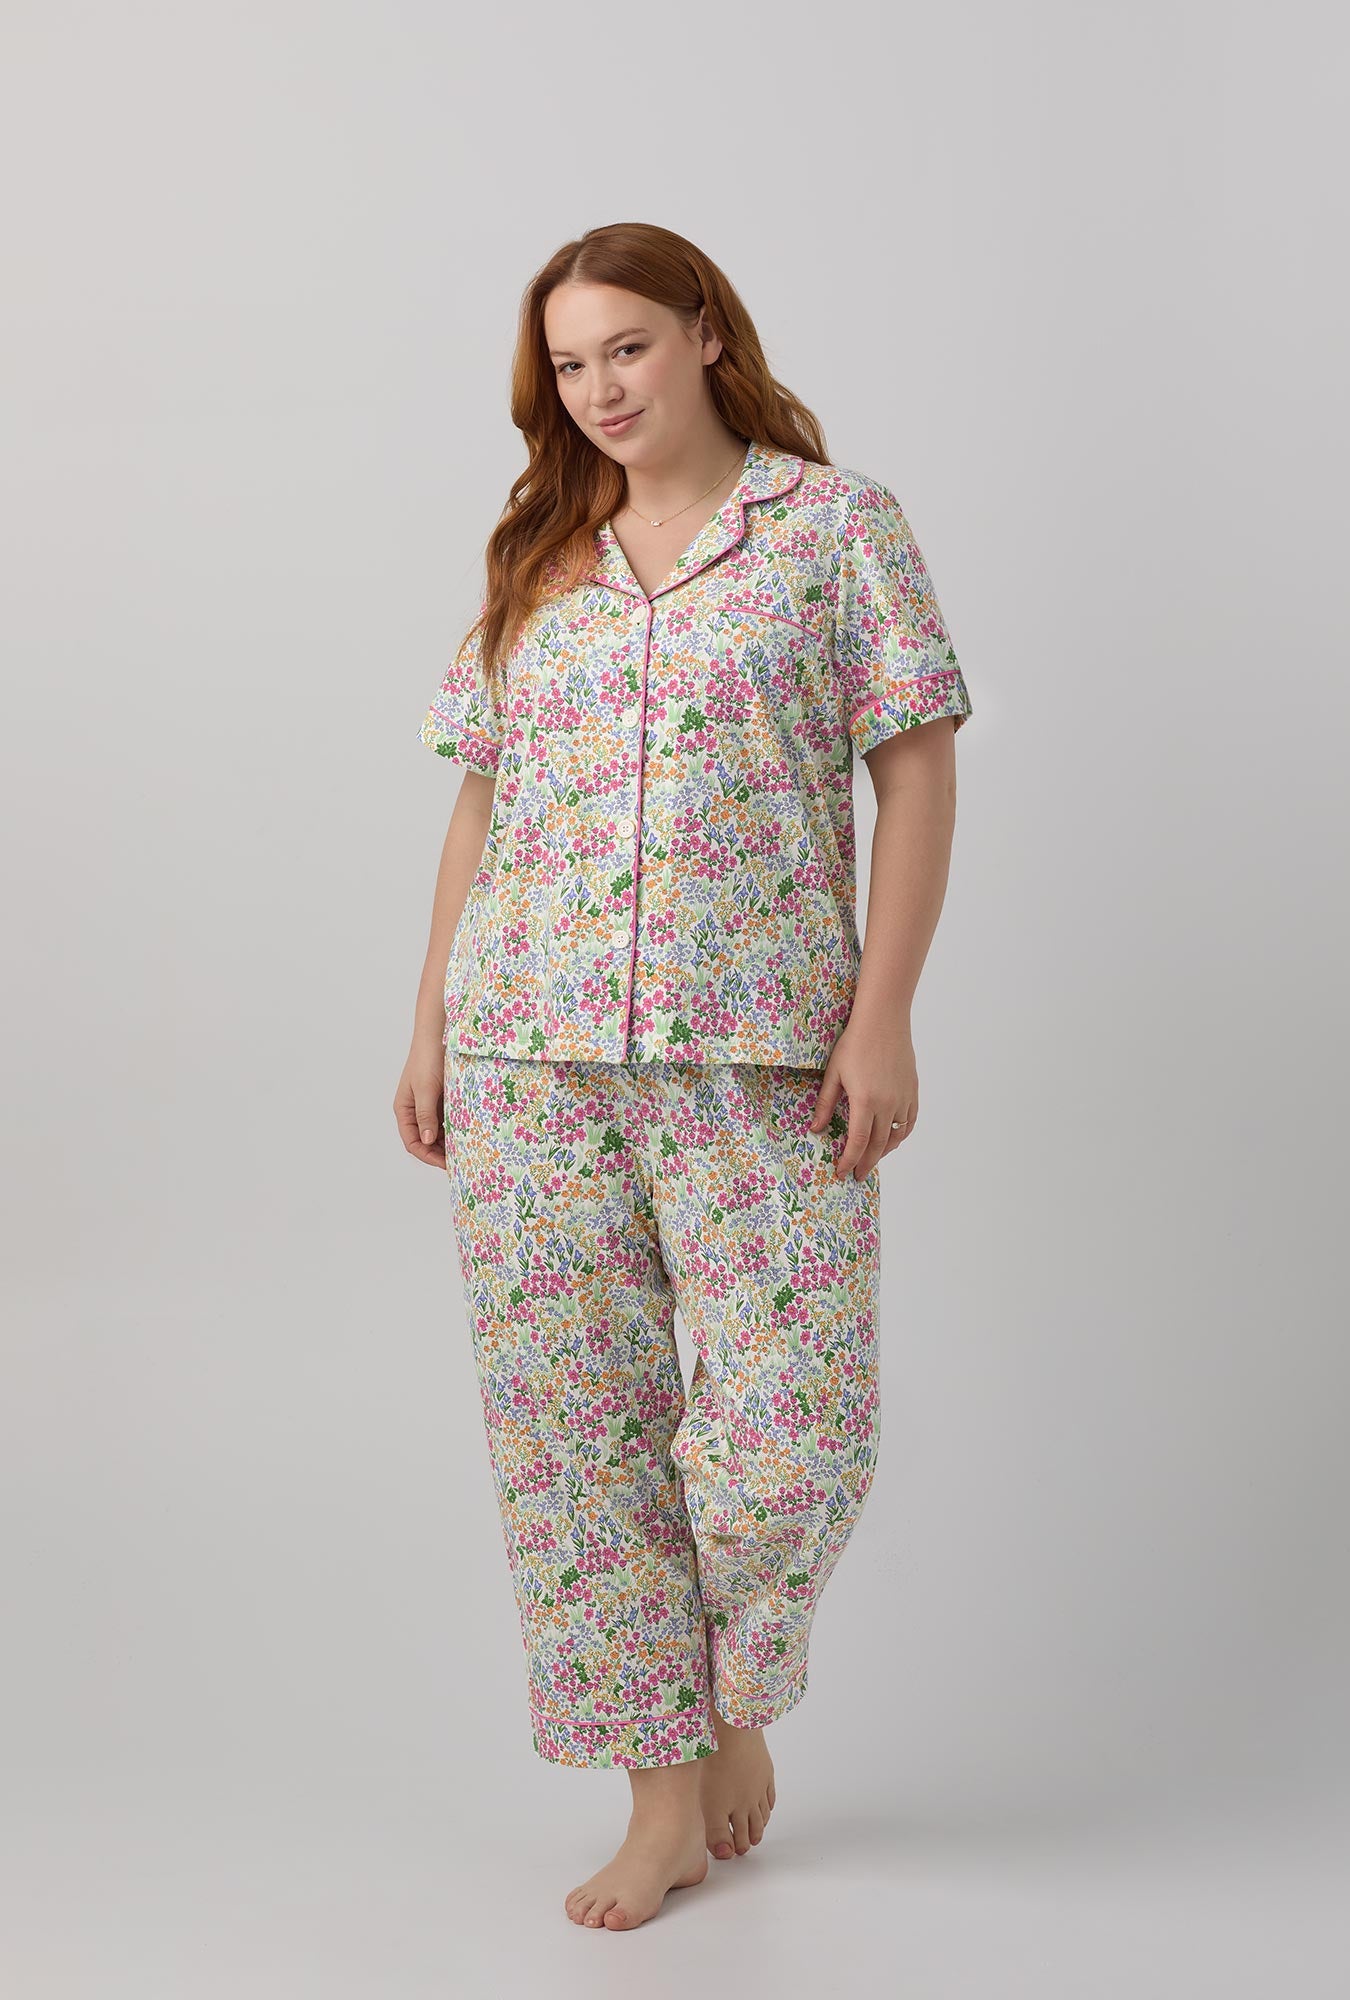 A lady wearing multi color shoe=rt sleeve clasic stretch jersey cropped pj set with cottage garden print.